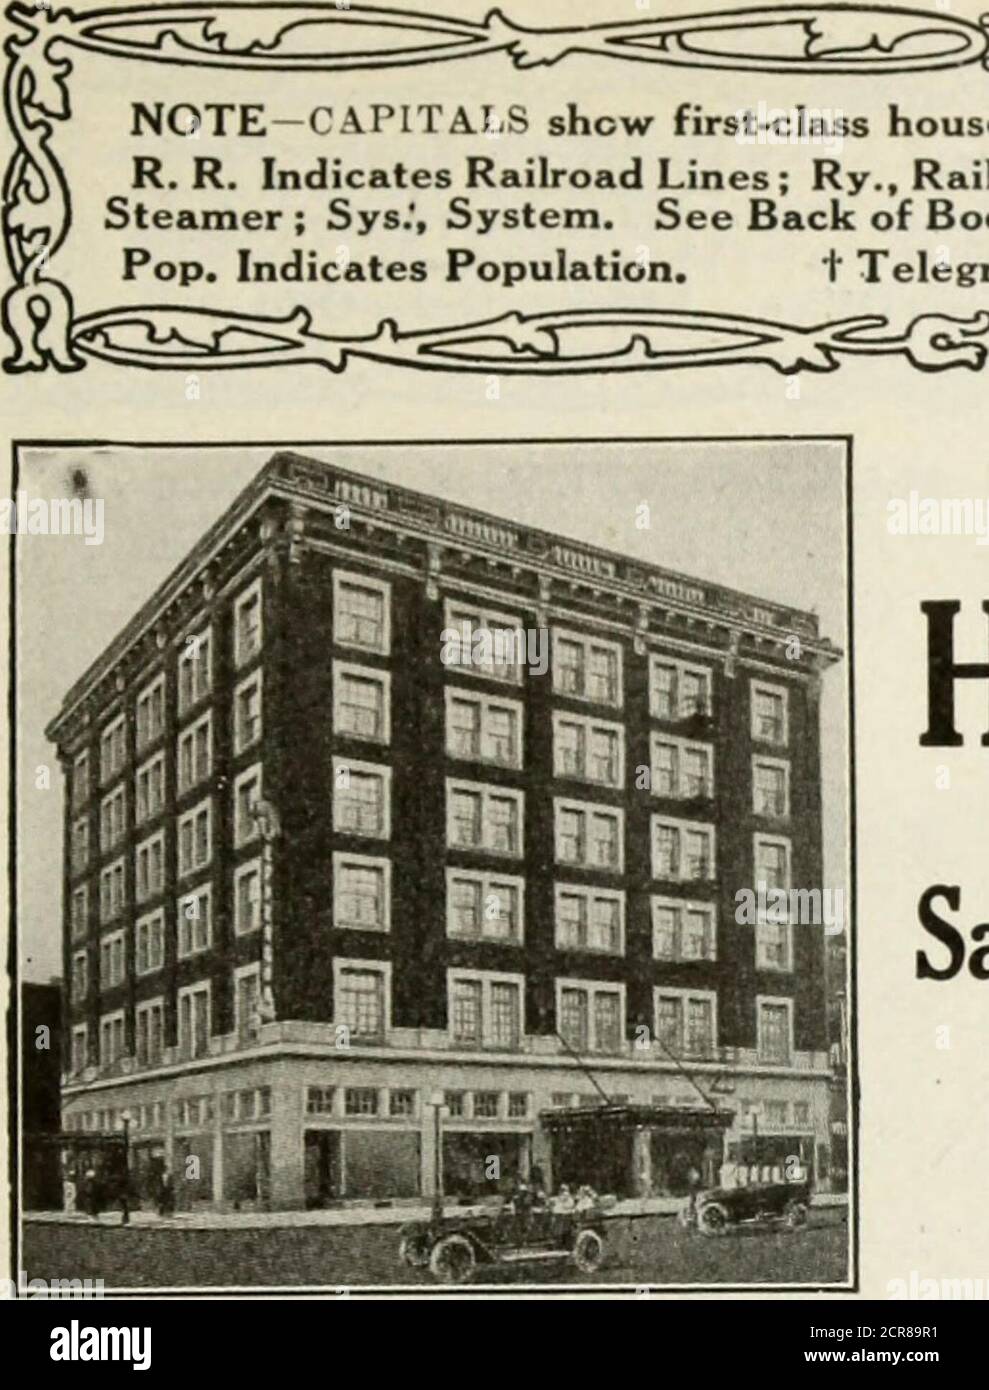 . The Official hotel red book and directory . p. 1,106.(RR., C. M. & St. P.; C, R. I. &P.) THE PARK. (A. P.) $2. M.B. Jones, Prop. HA WARDEN, * f Sioux Co. Pop.2,107. (RR., C, M. & St. P.; C. &N, W.) DEPOT HOTEL. (A. P.) .$2.25to $3. D. A. Morgan. HEDRICK, Eeota Co. Pop. 978.(RR., C, B. & Q., C, M. & St. P.)COMMERCIAL HOTEL. HULL, * f Sioux Co. Pop. 658. (RR.,C, M. & St. P.) HOTEL LINCOLN. (A. P.)$2.25. L. I. Boggess. HUMBOLDT. Humboldt Co. Pop. 1,800. (RR., M. & St. L.; C. &N. W.) RUSSELL HOUSE. (A. P.)$2.50. II. II. Ki SSELL. HUMESTON, * f Wayne Co. Ii&gt;. 1,006. (RR.. Burl.)Reed Hotel. IDA Stock Photo